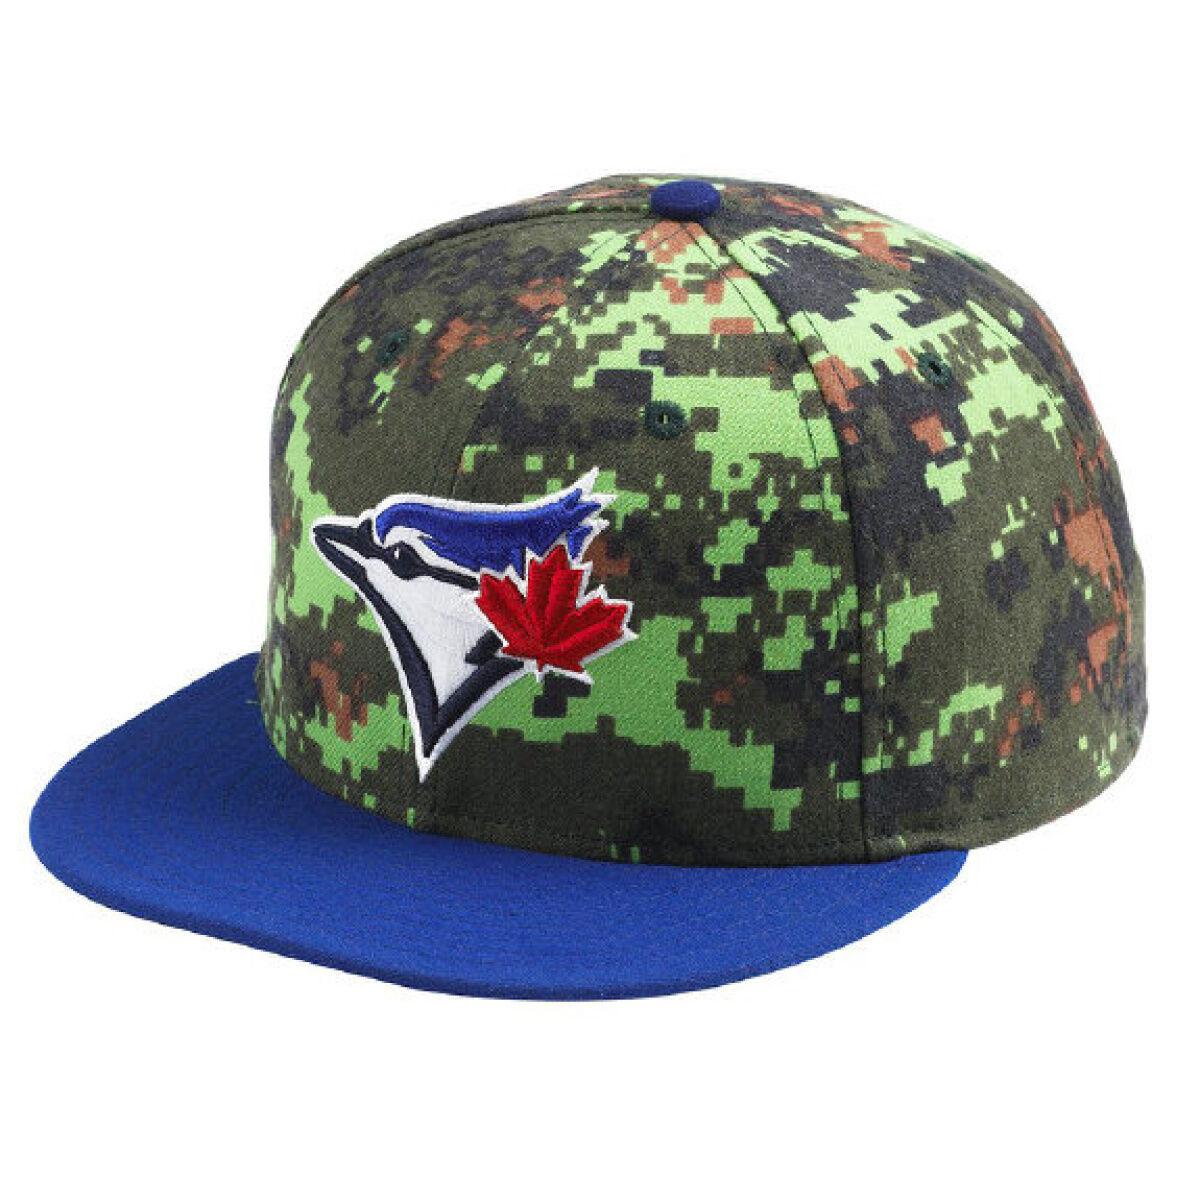 MLB teams are wearing camouflage for Memorial Day